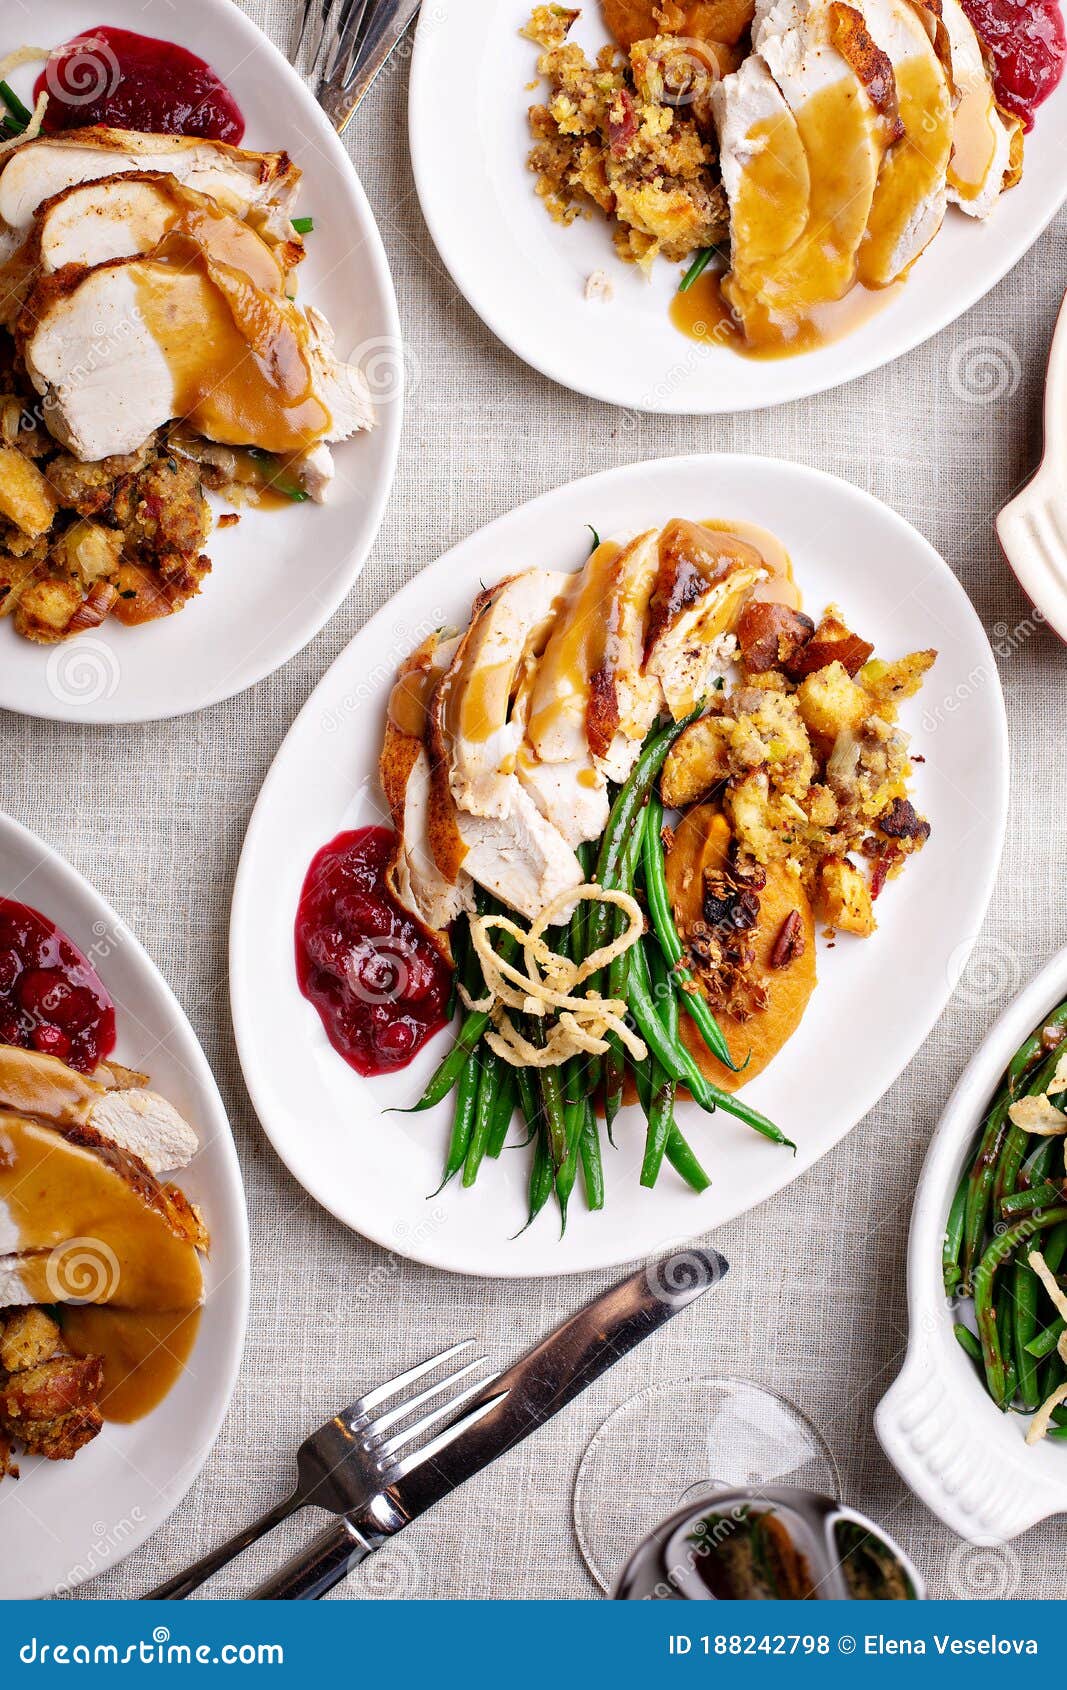 Festive Thankgiving Dinner Table with Plates of Food Stock Photo ...